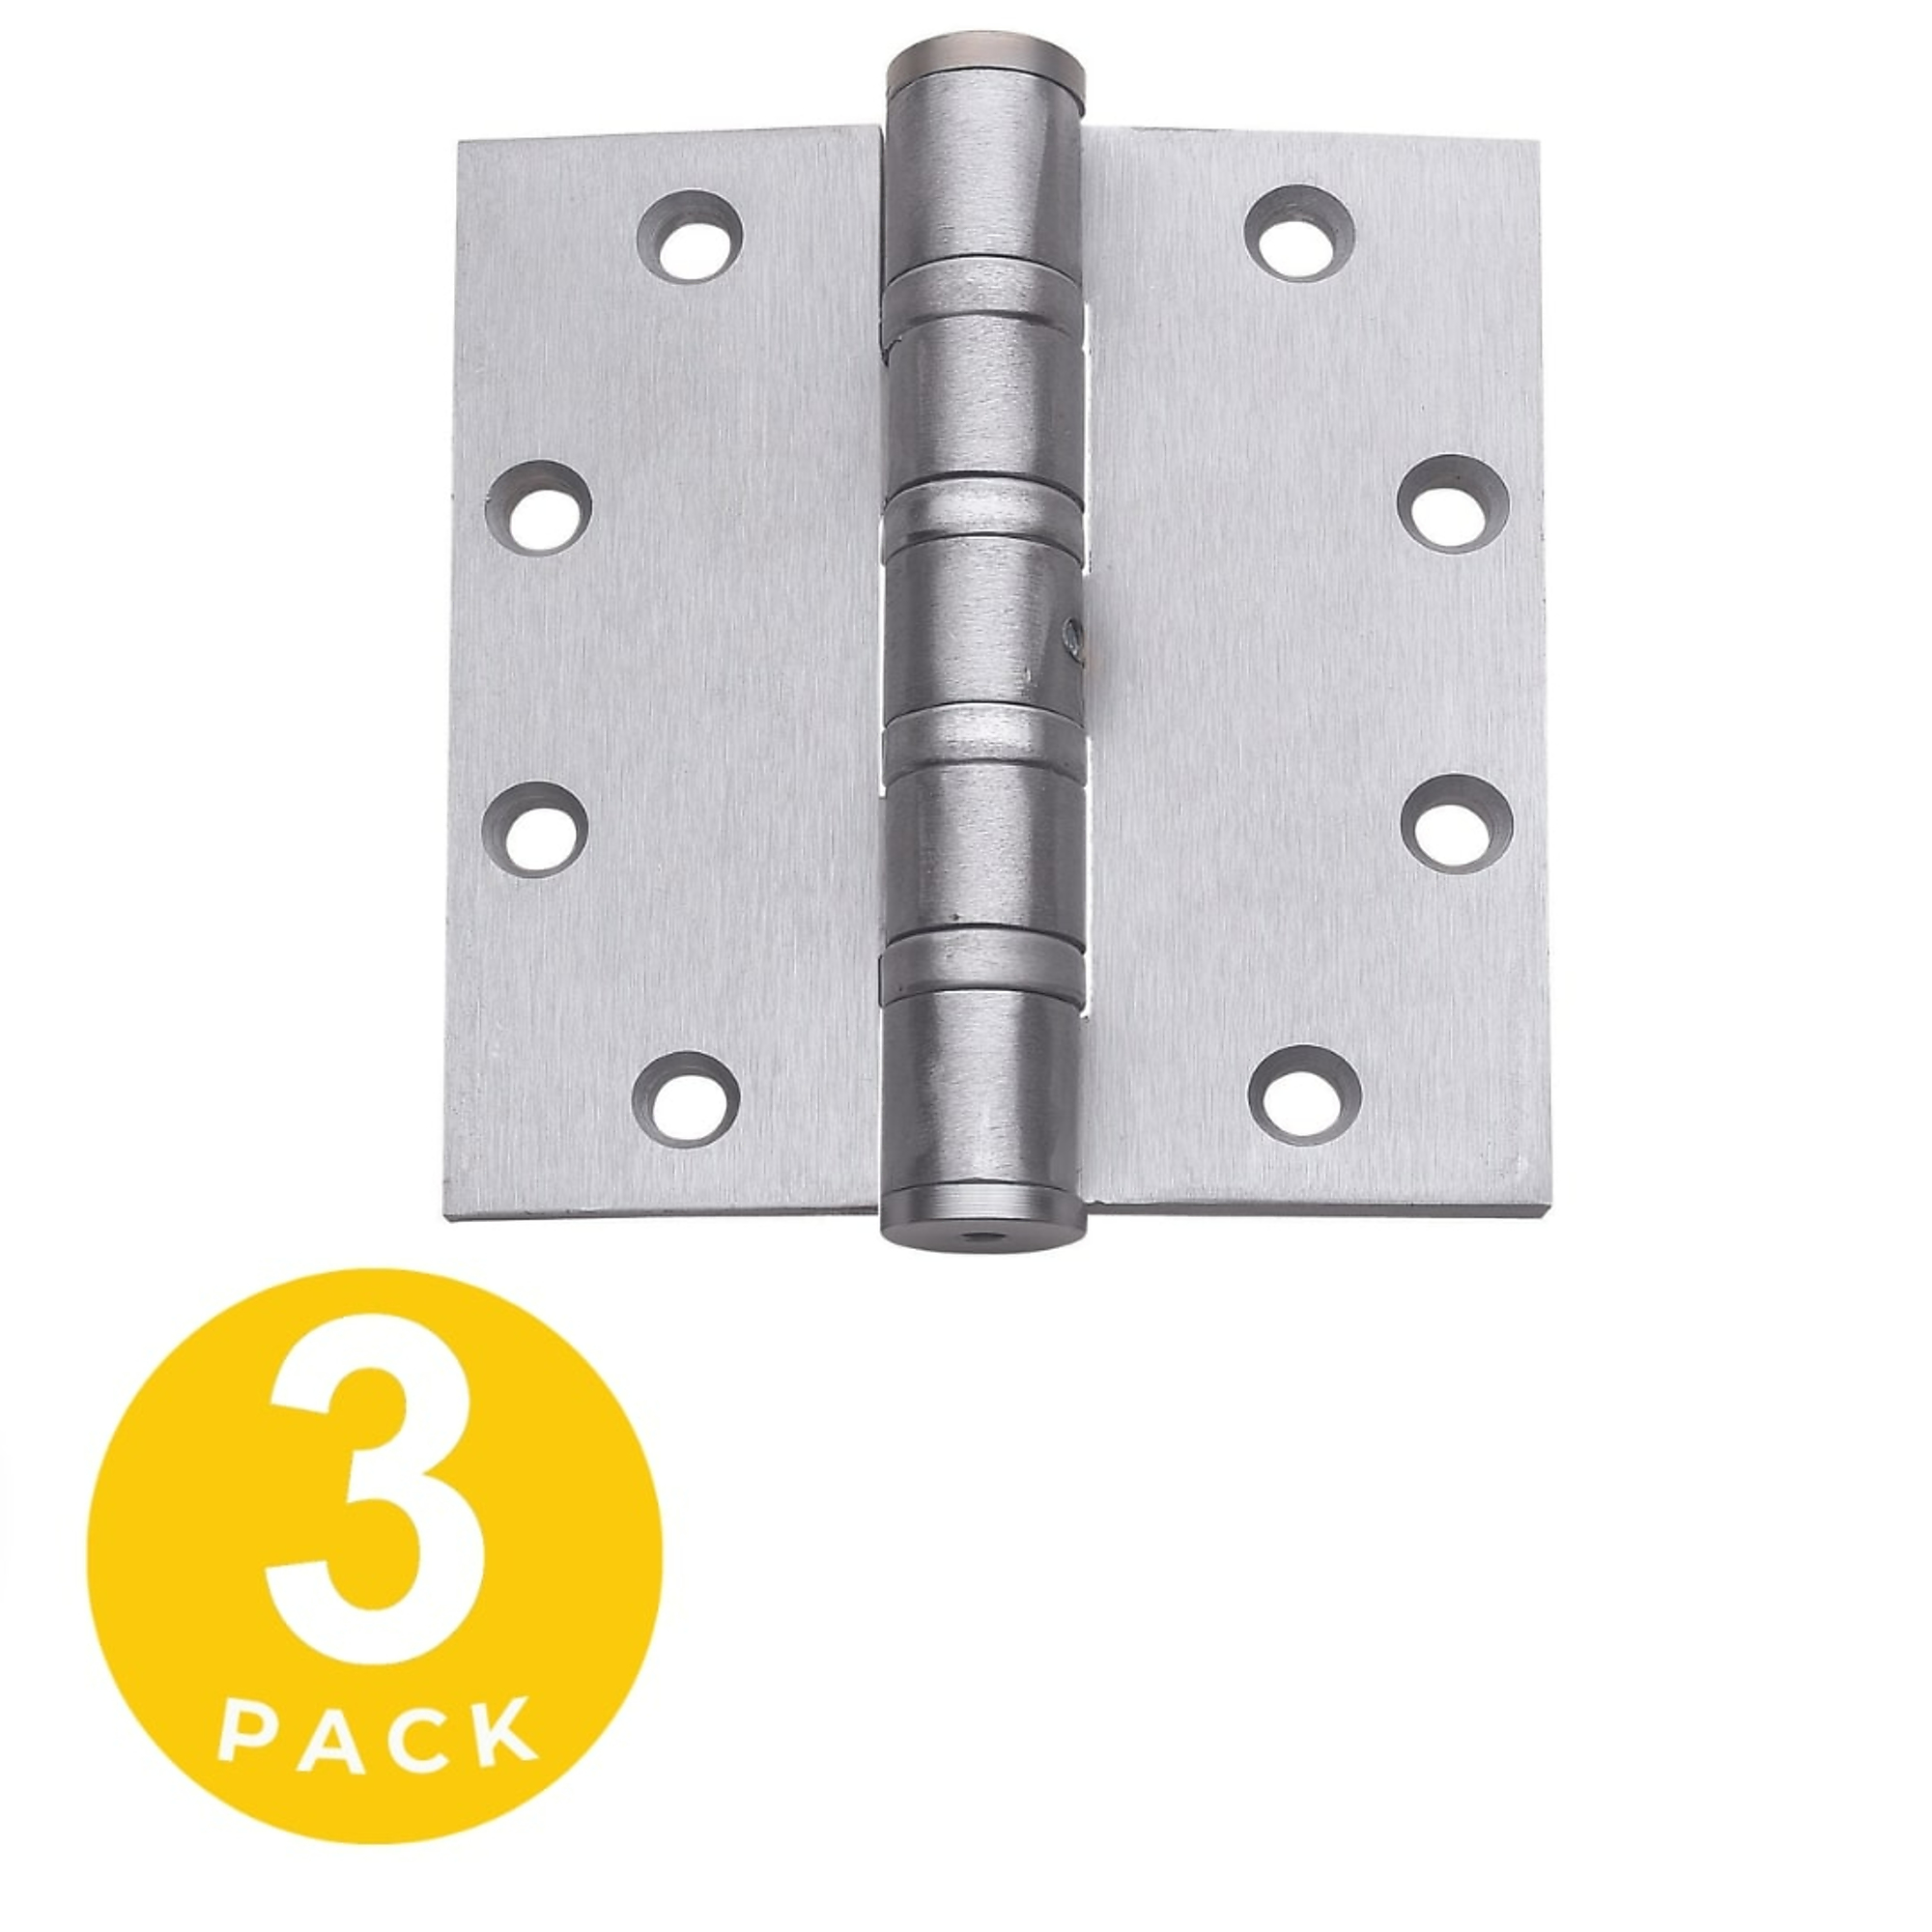 Commercial Hinge — 3-Pack, Dull Chrome, 5Inch x 4.5Inch, Model - Global Door Controls CPH5045BBNRP26D-3